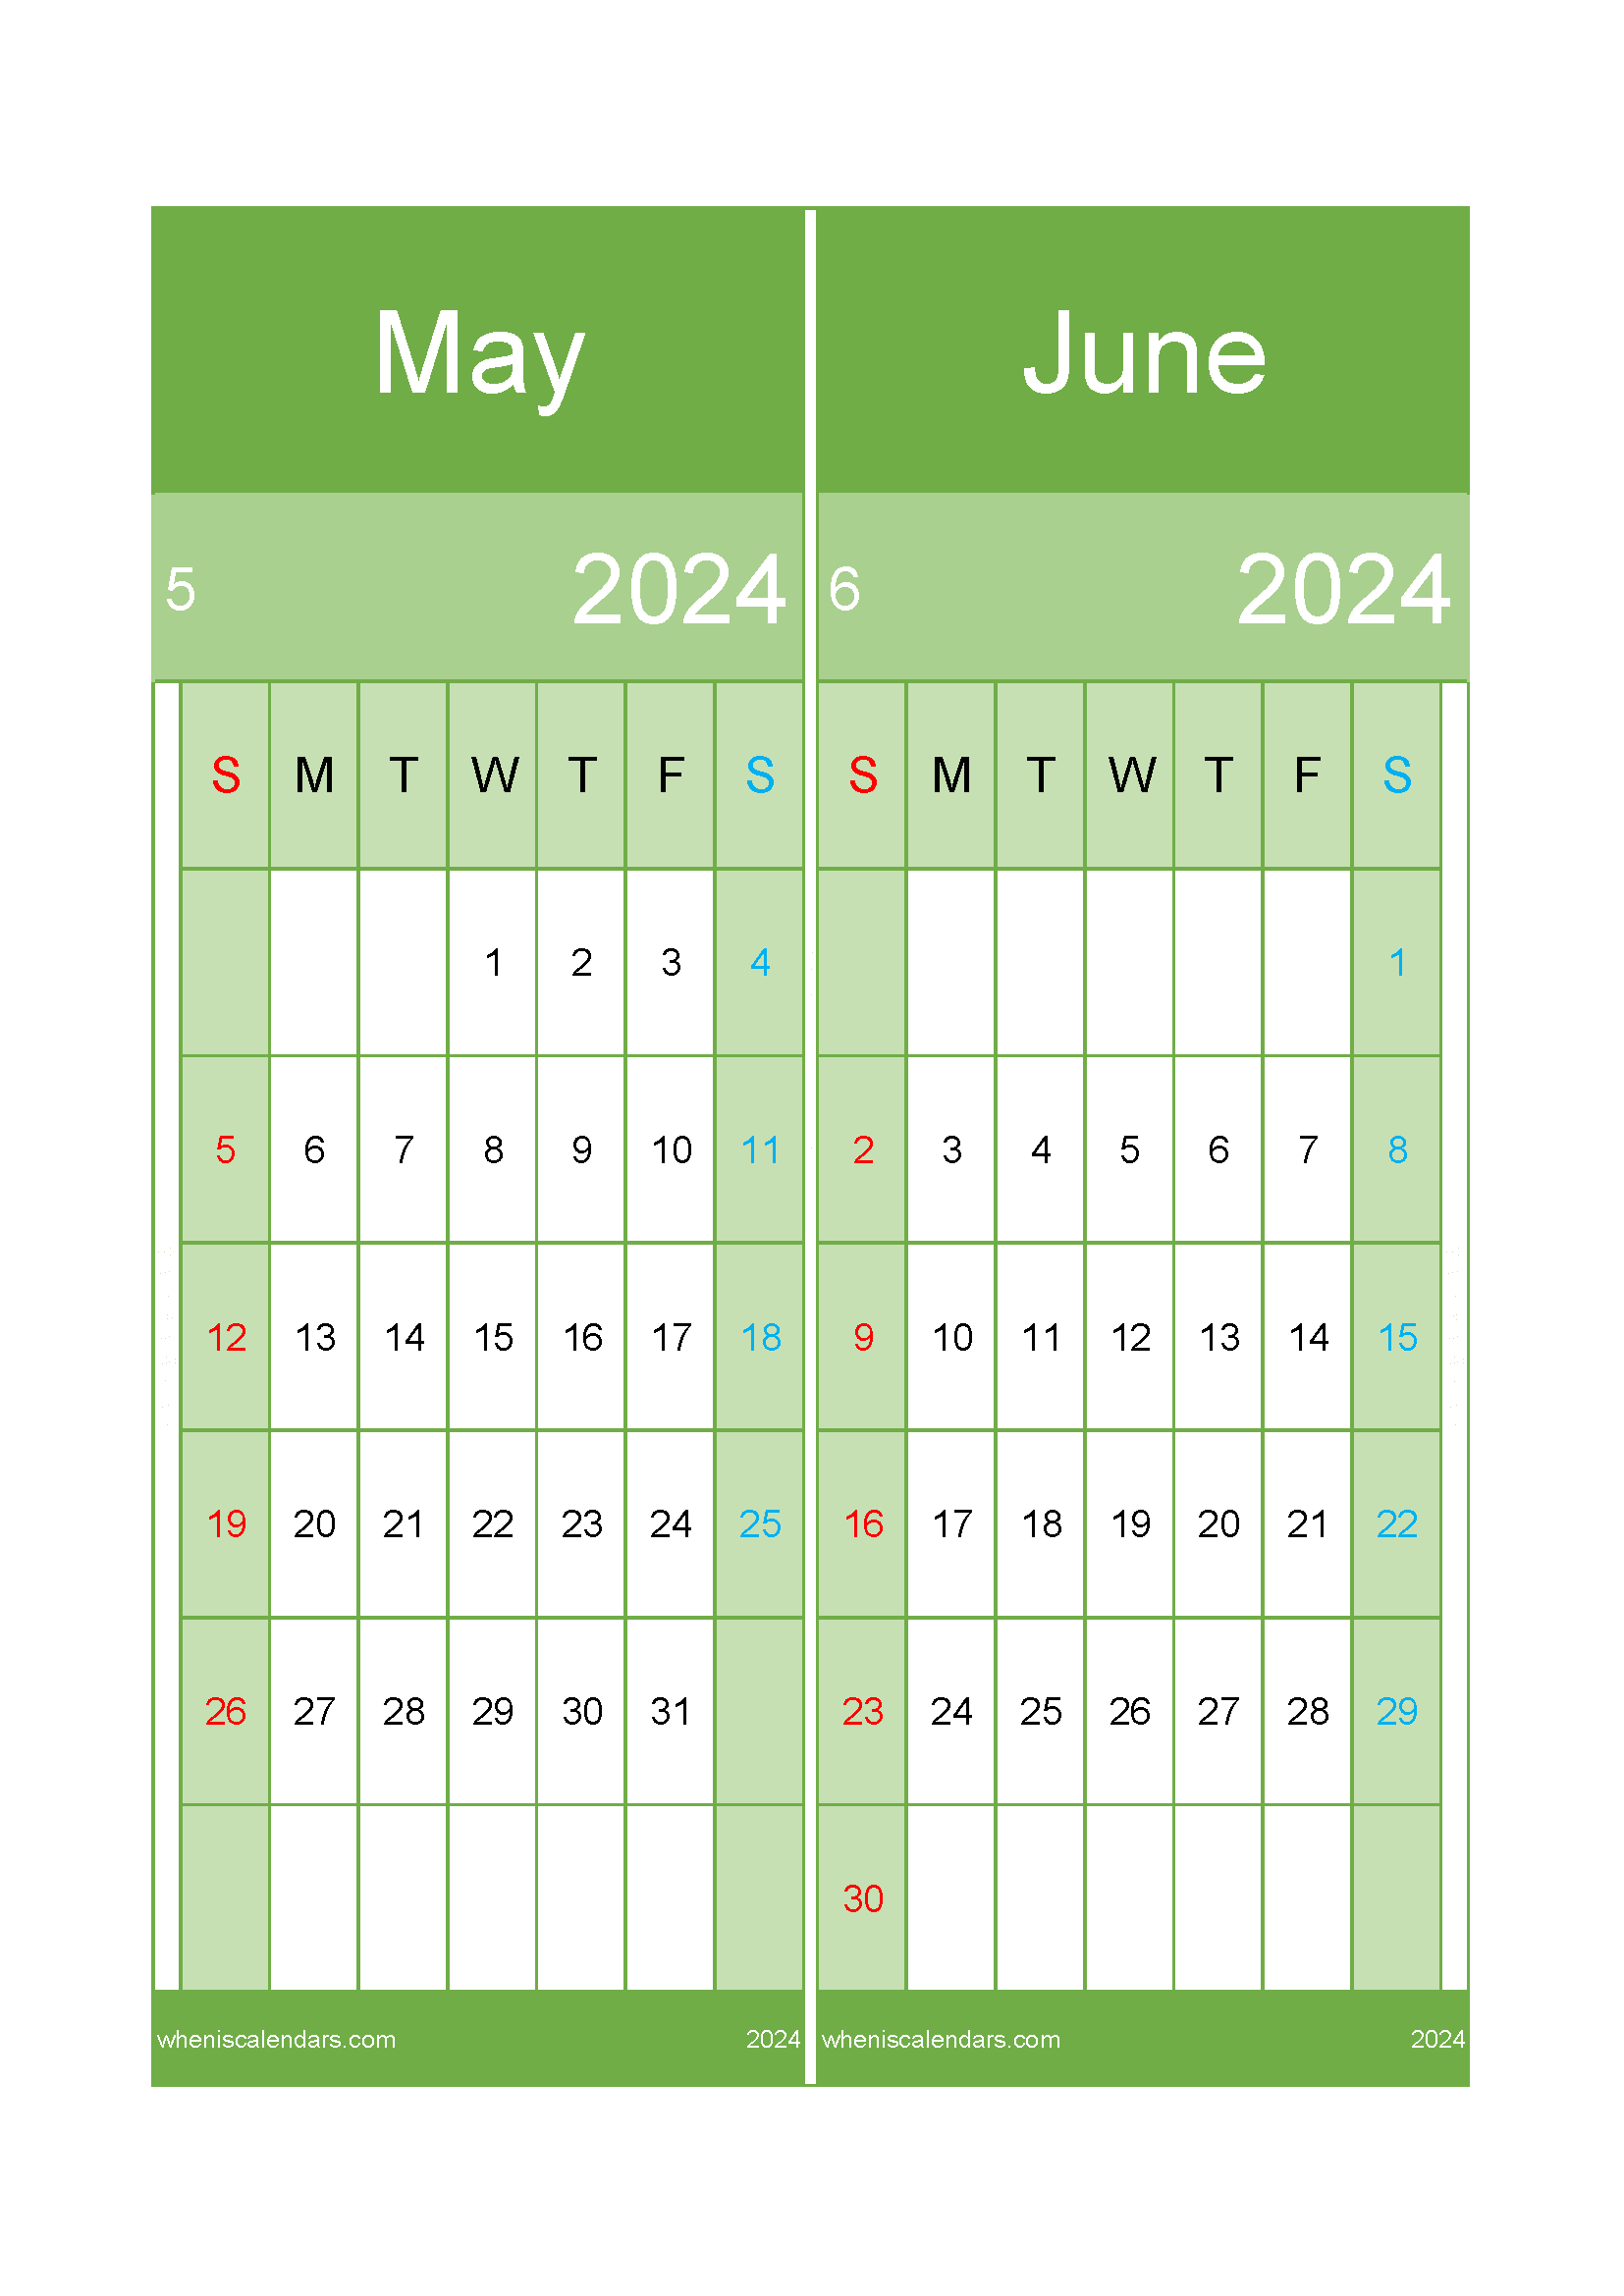 Download June and May calendar 2024 A4 MJ242027